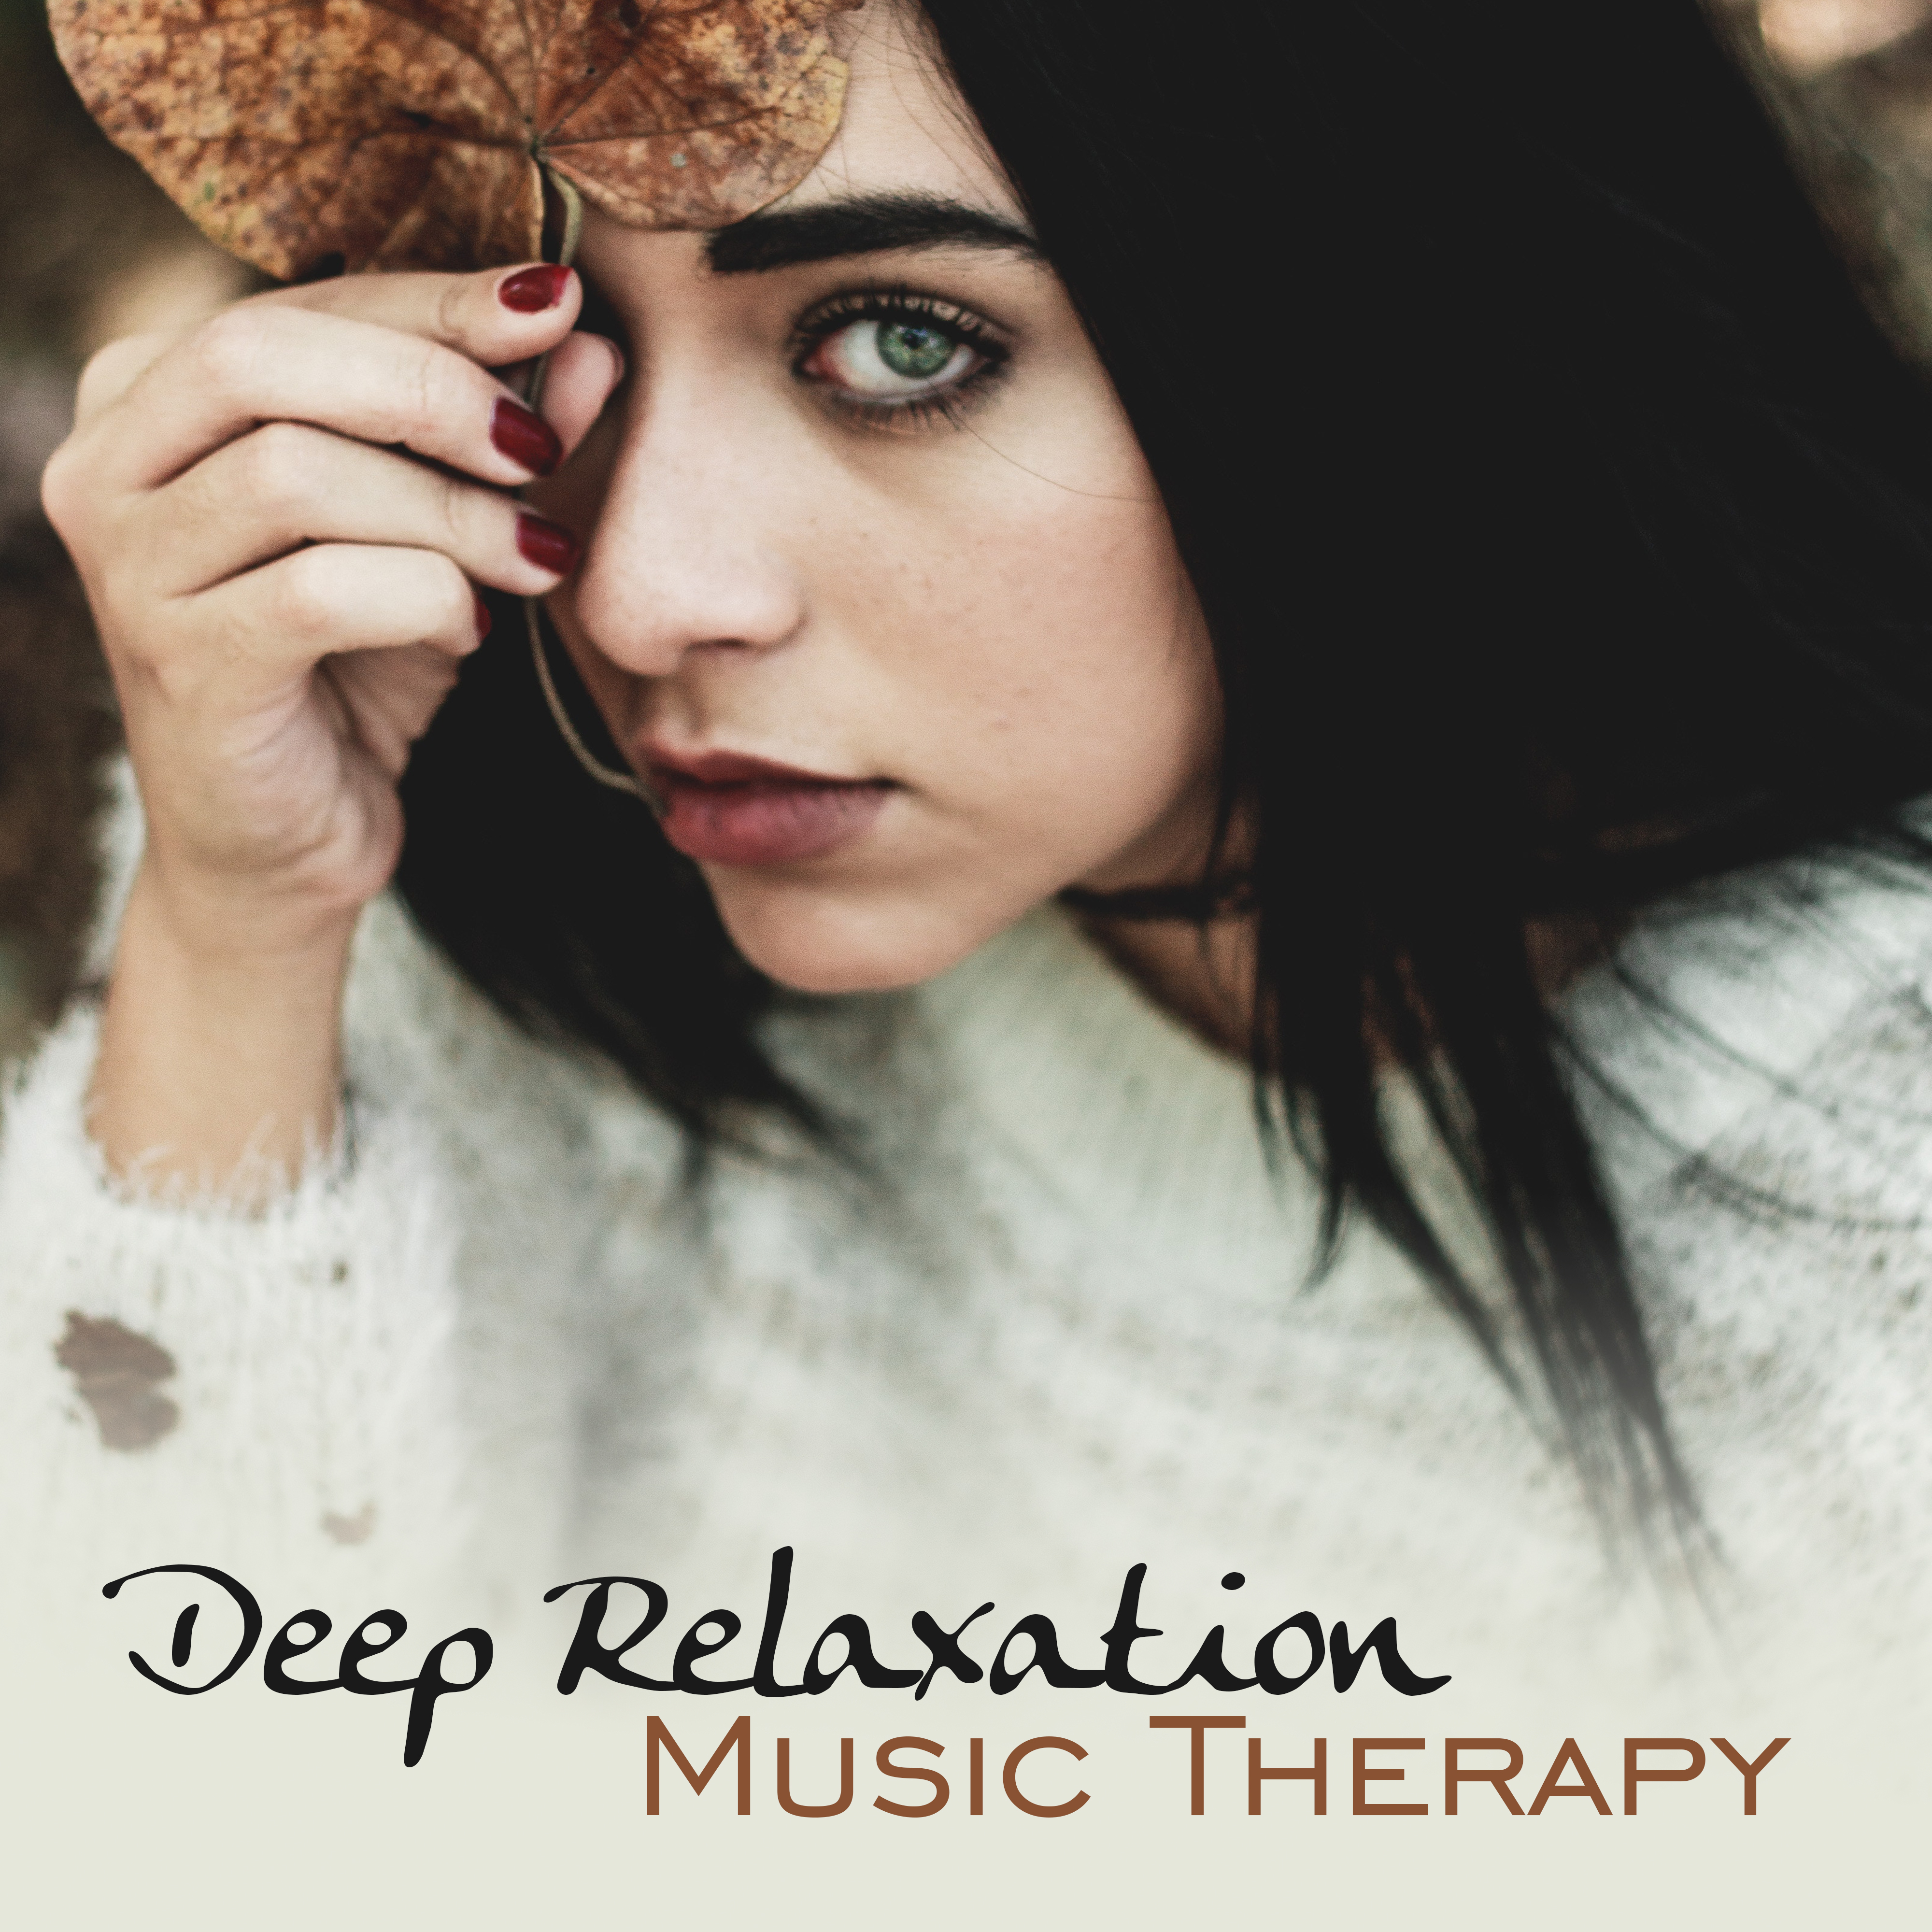 Deep Relaxation Music Therapy – Soft Sounds to Calm Down, Music to Rest, Healing Waves